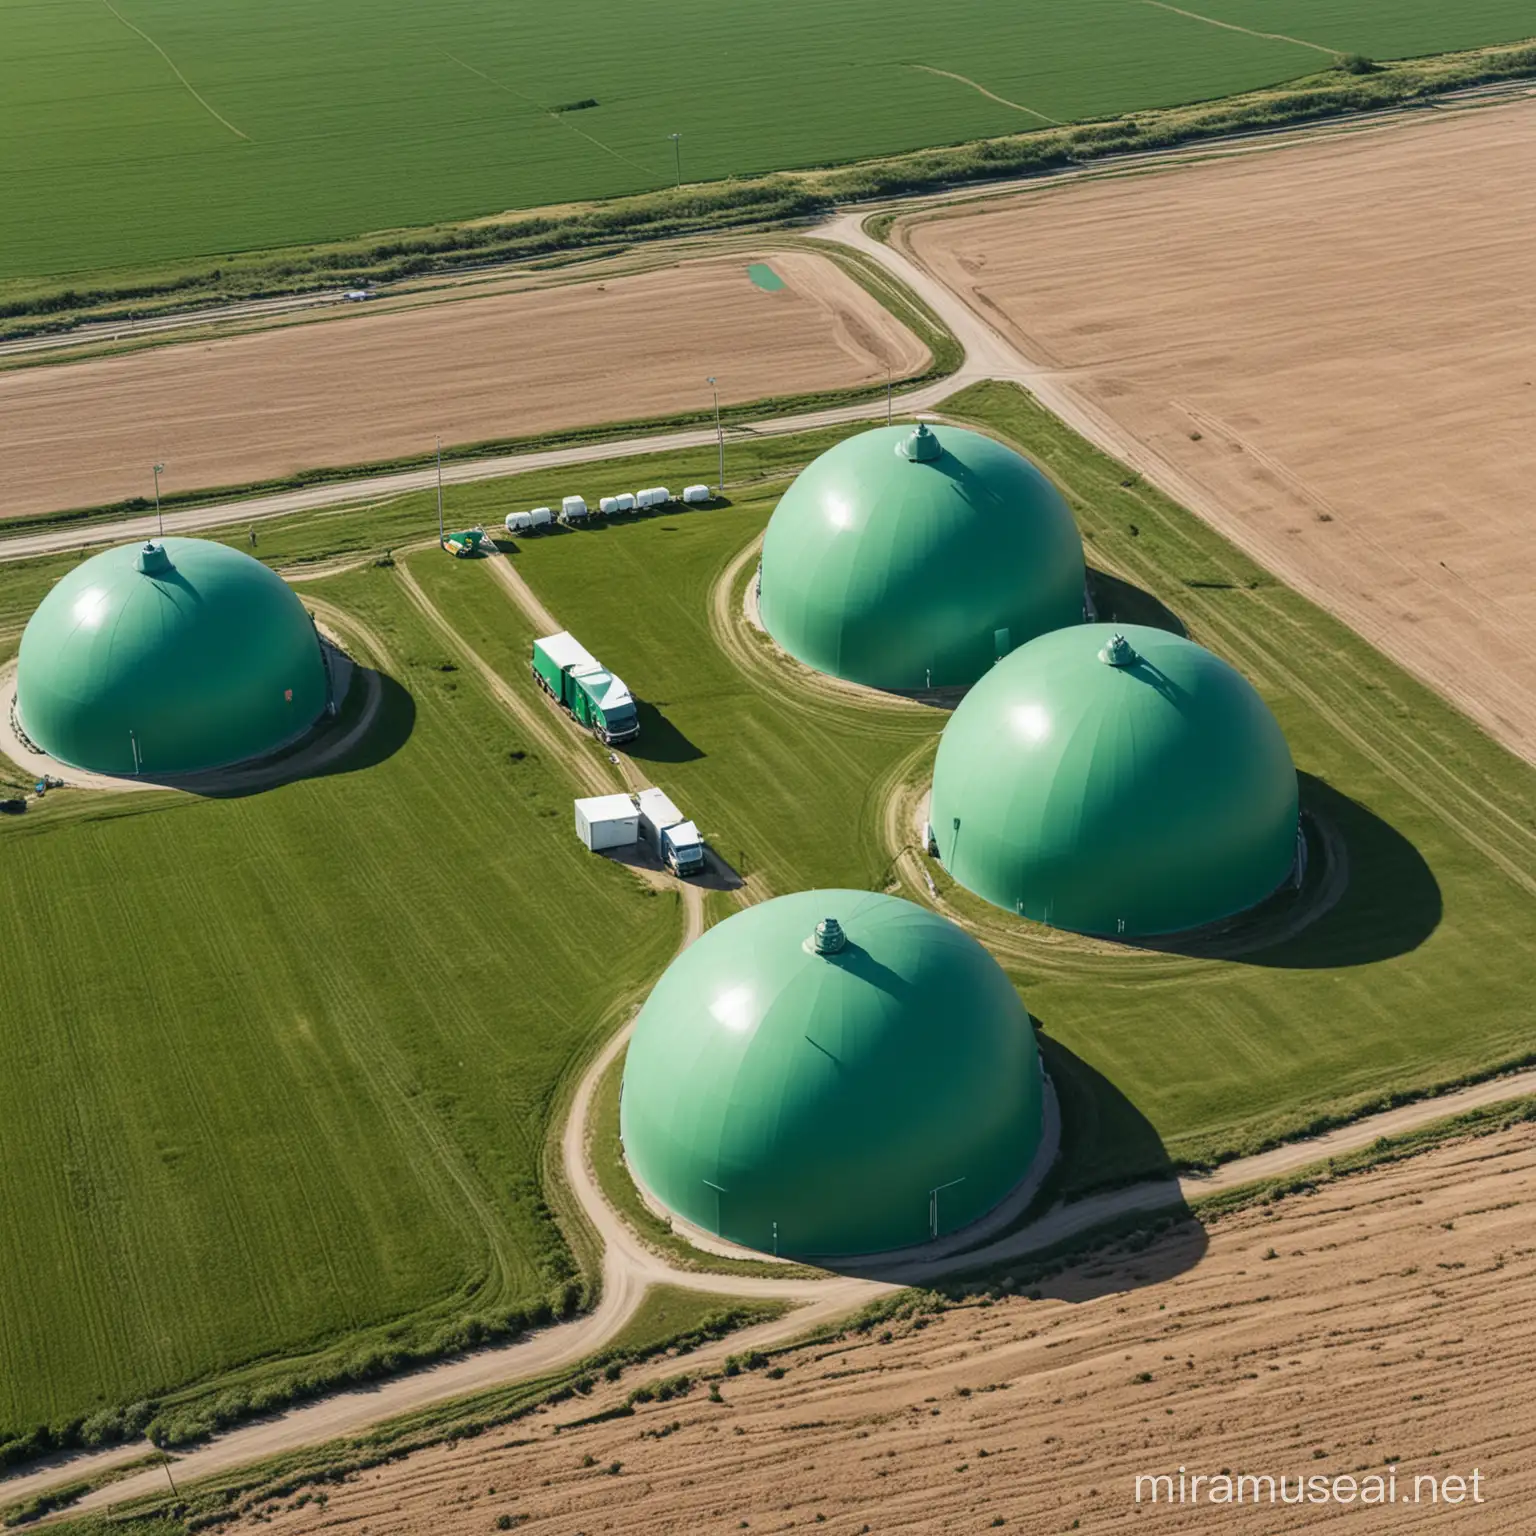 Methane Park Three Asymmetrical Green Domes in Field with Trucks